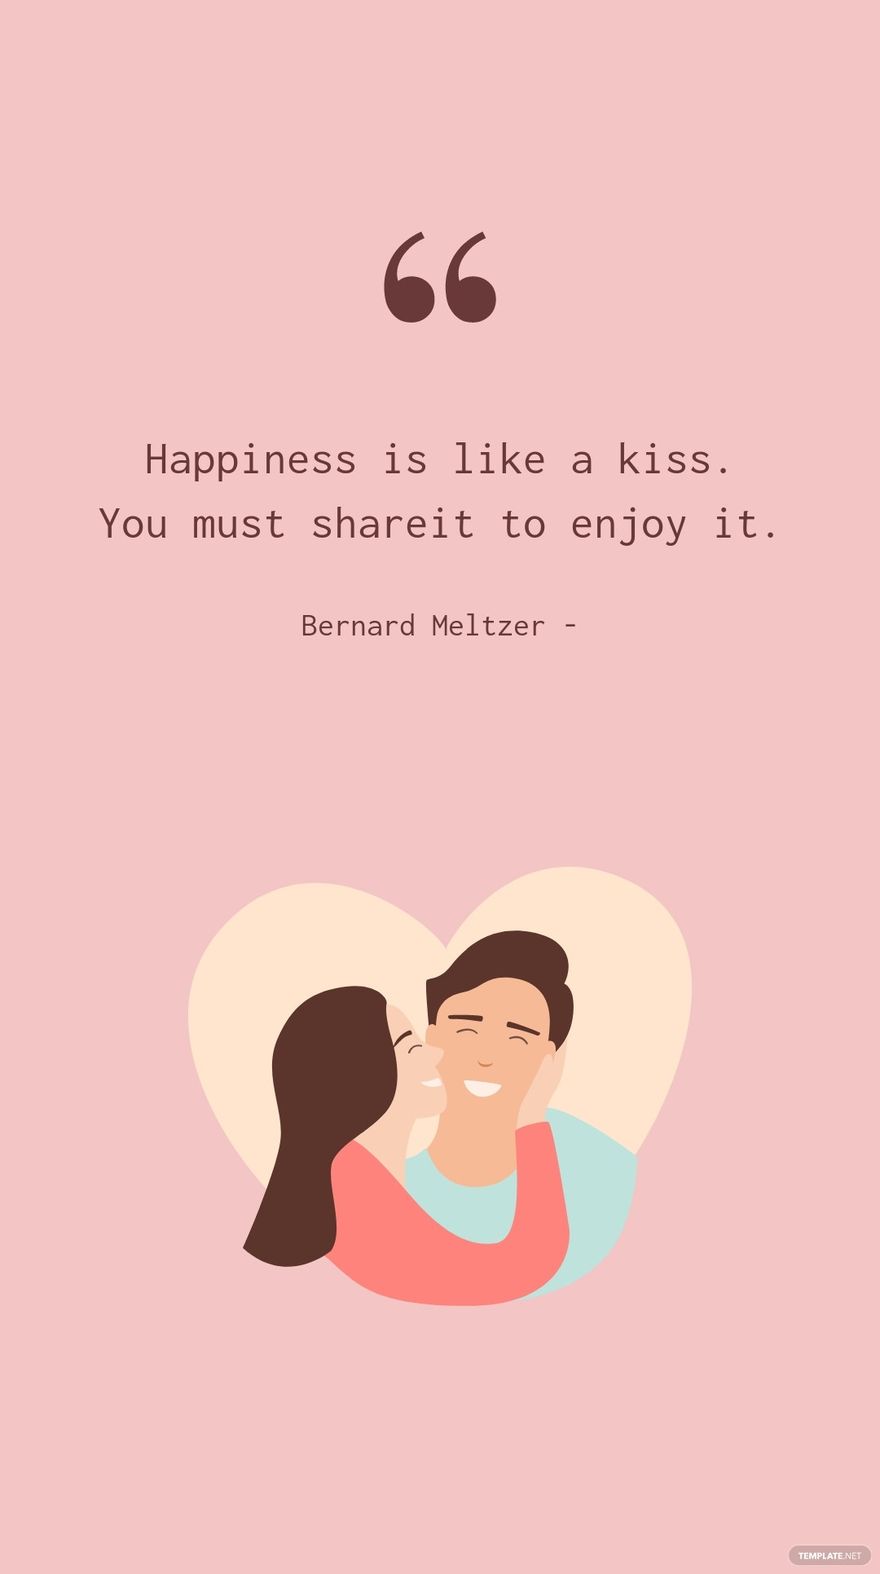 Free Bernard Meltzer - Happiness is like a kiss. You must share it to enjoy it. in JPG